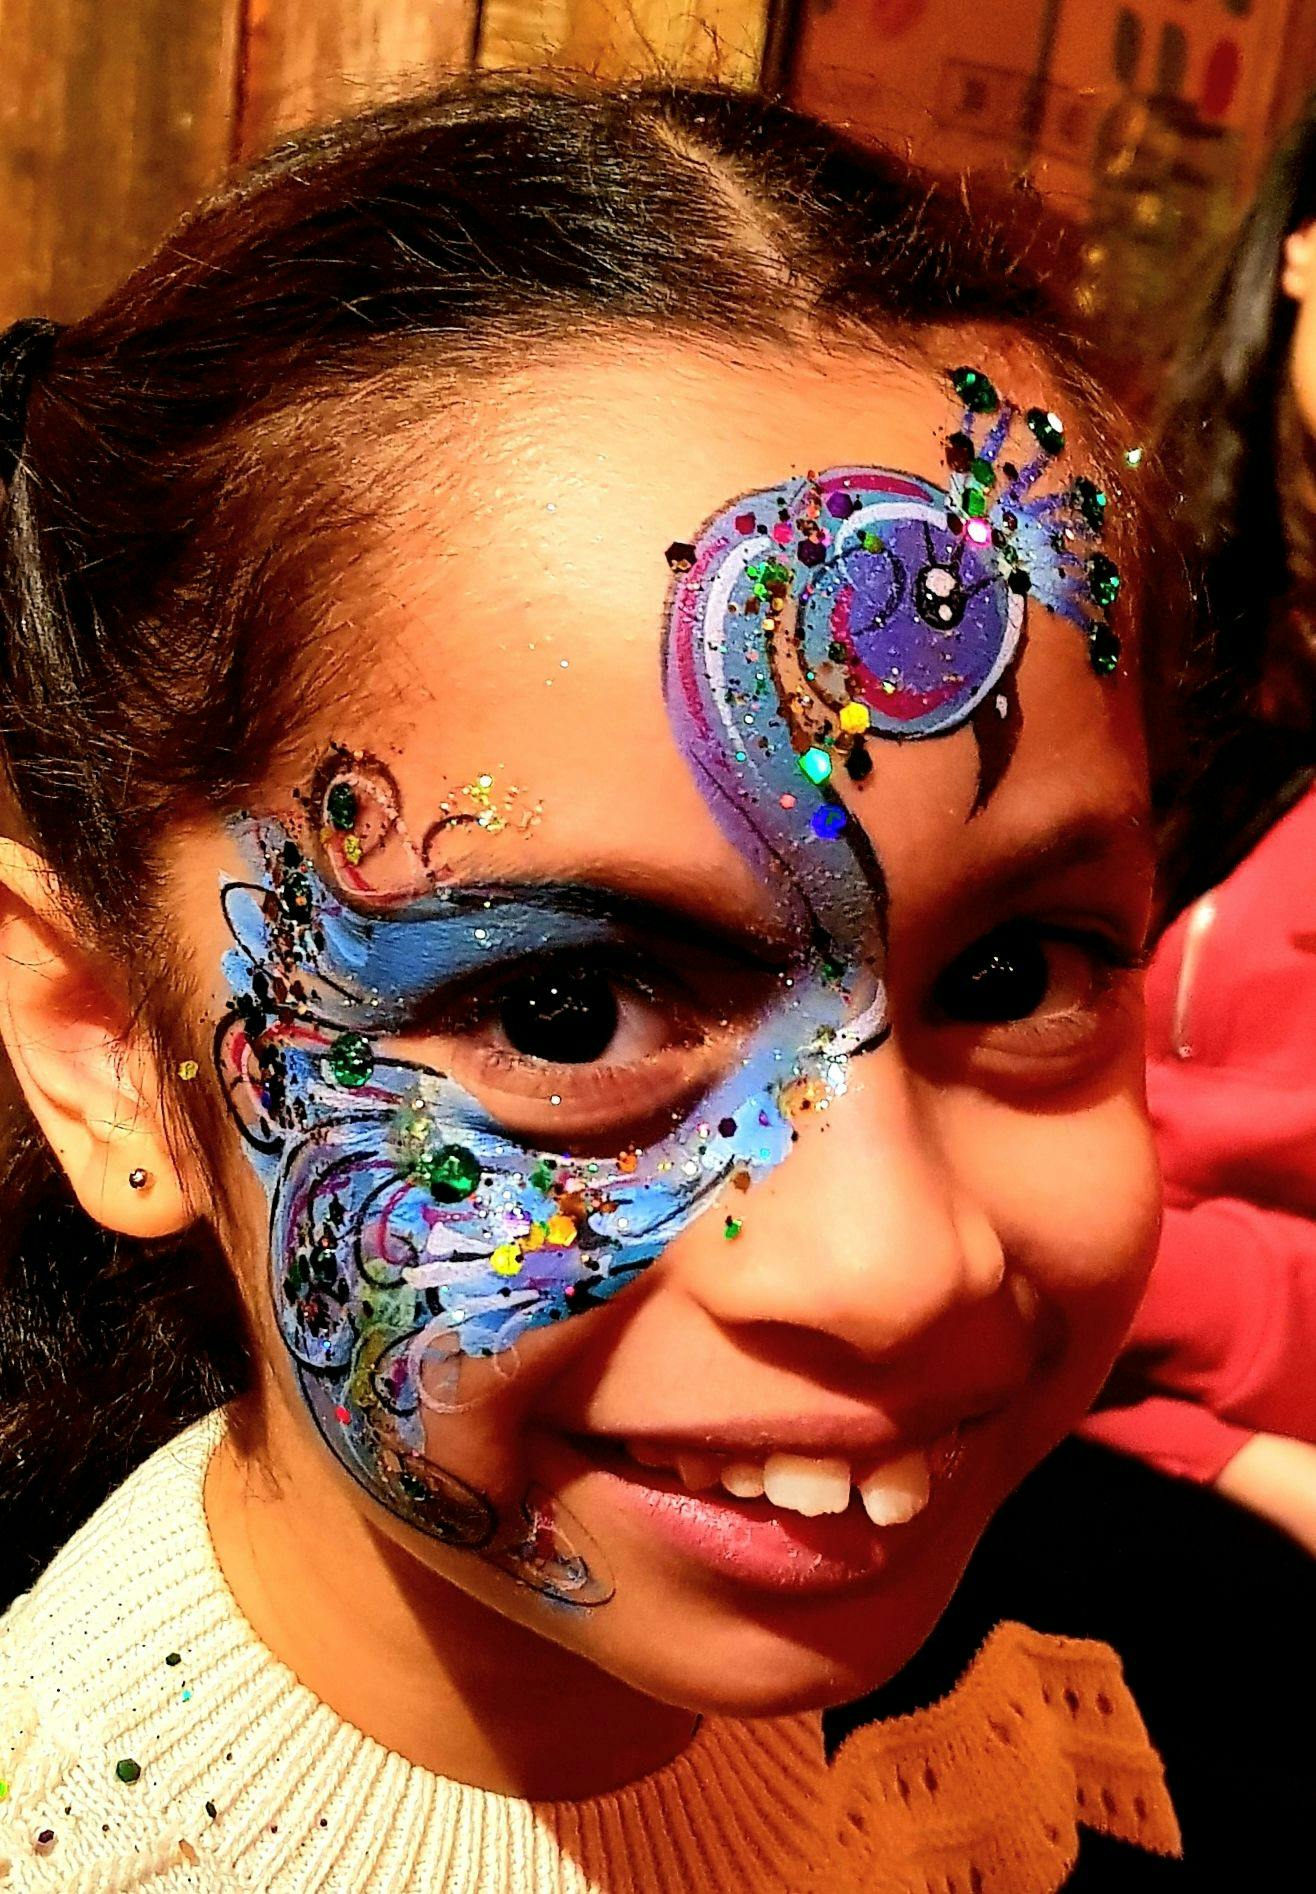 A child smiling with her face painted.